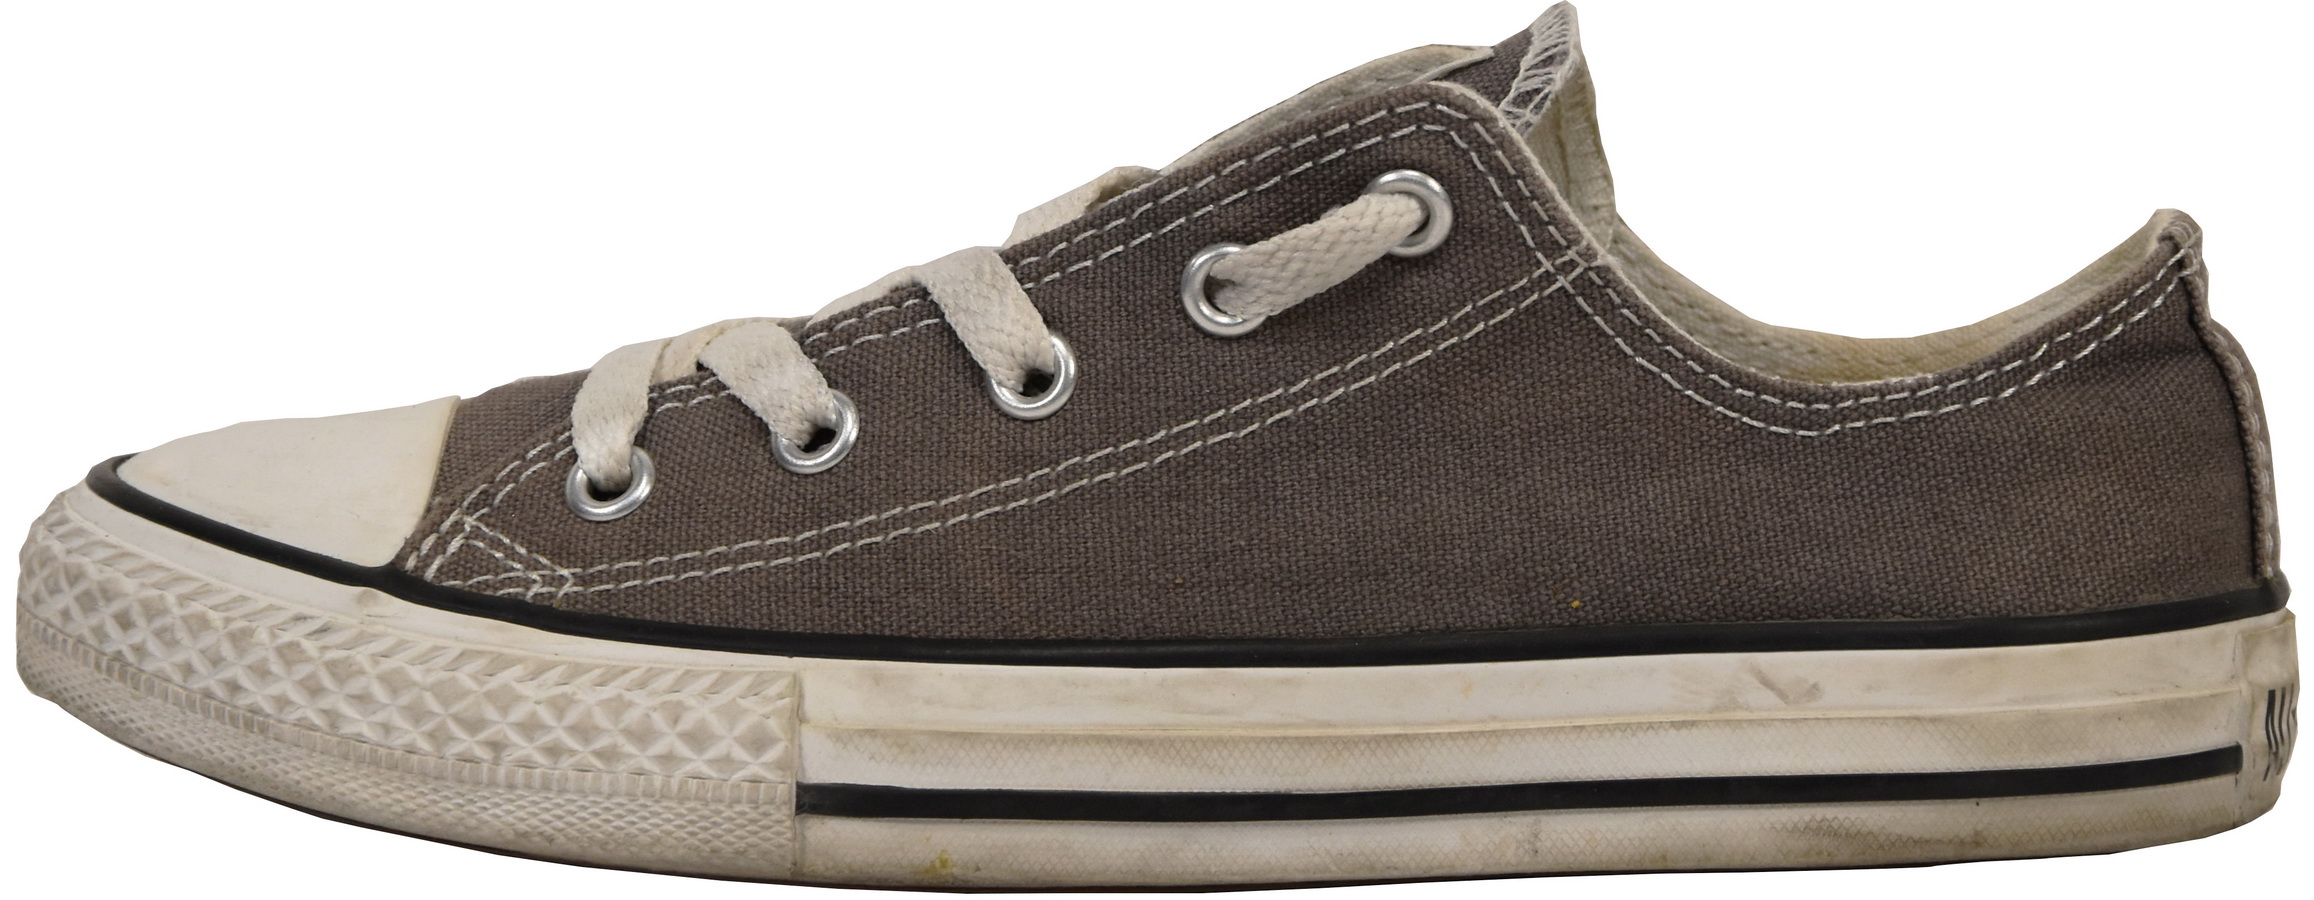 converse couleur taupe